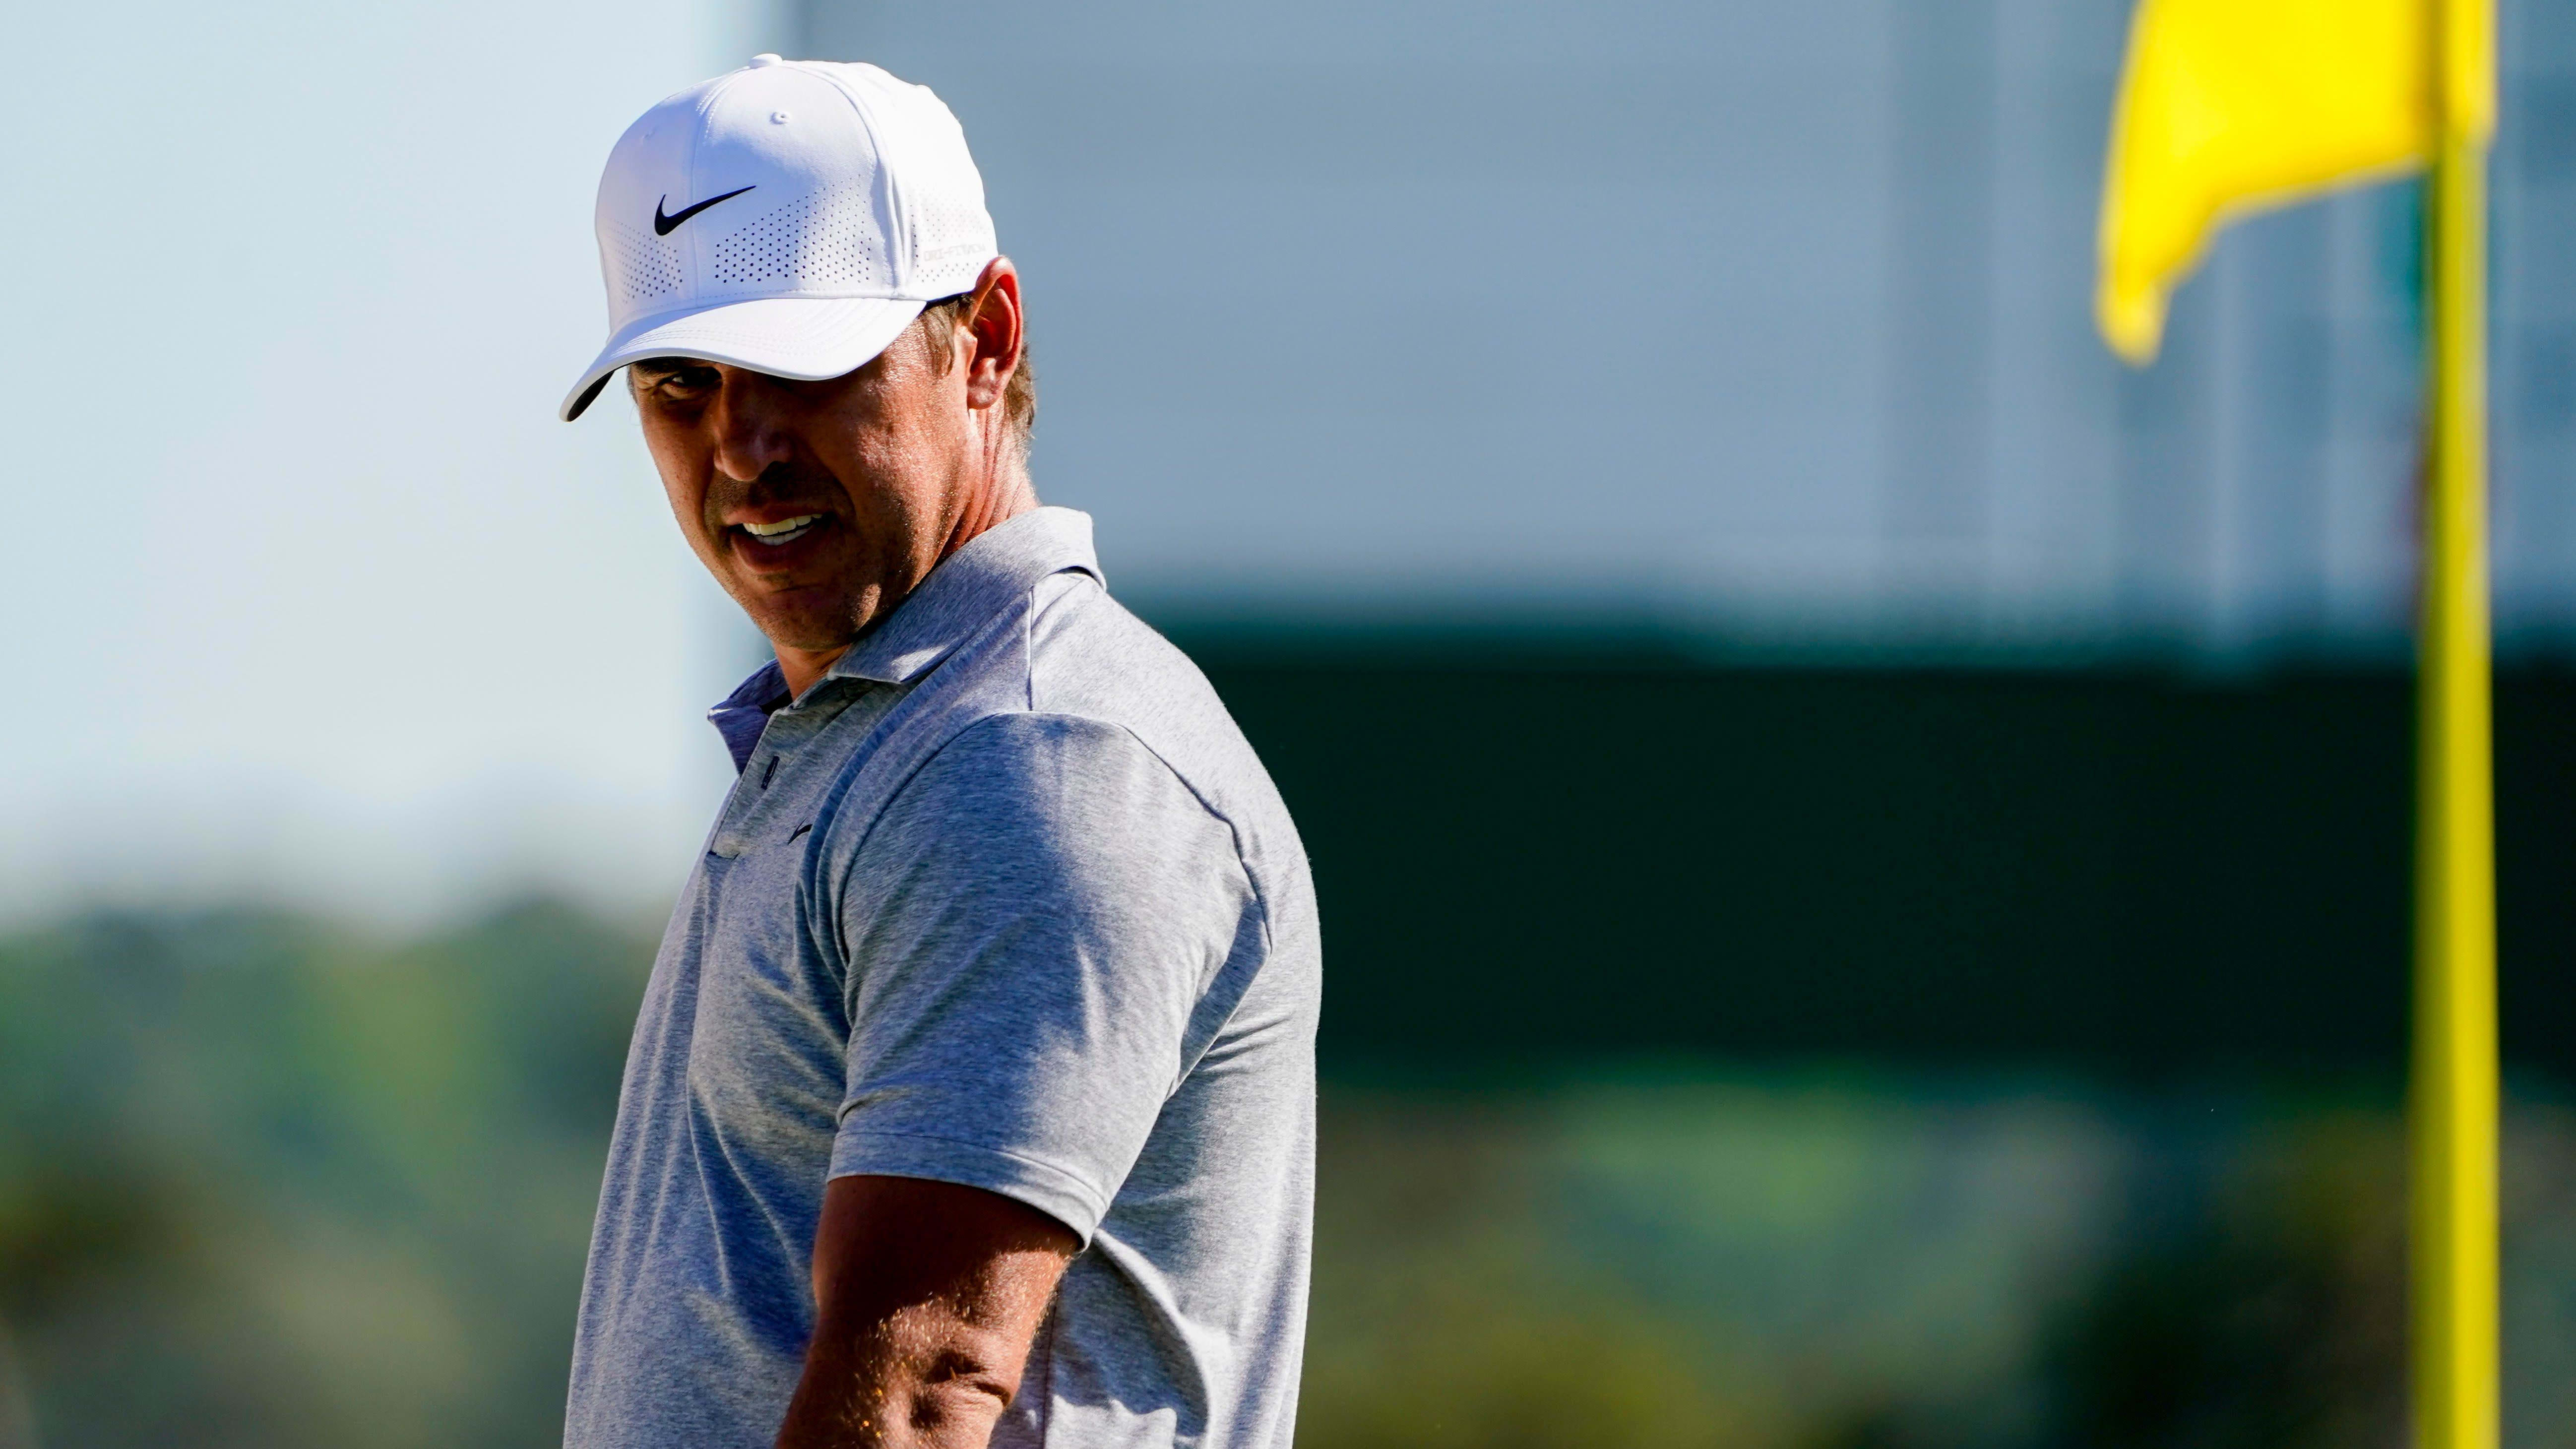 Brooks Koepka Not Sounding Optimistic With PGA Championship Looming: 'Trying to Find Some Answers'